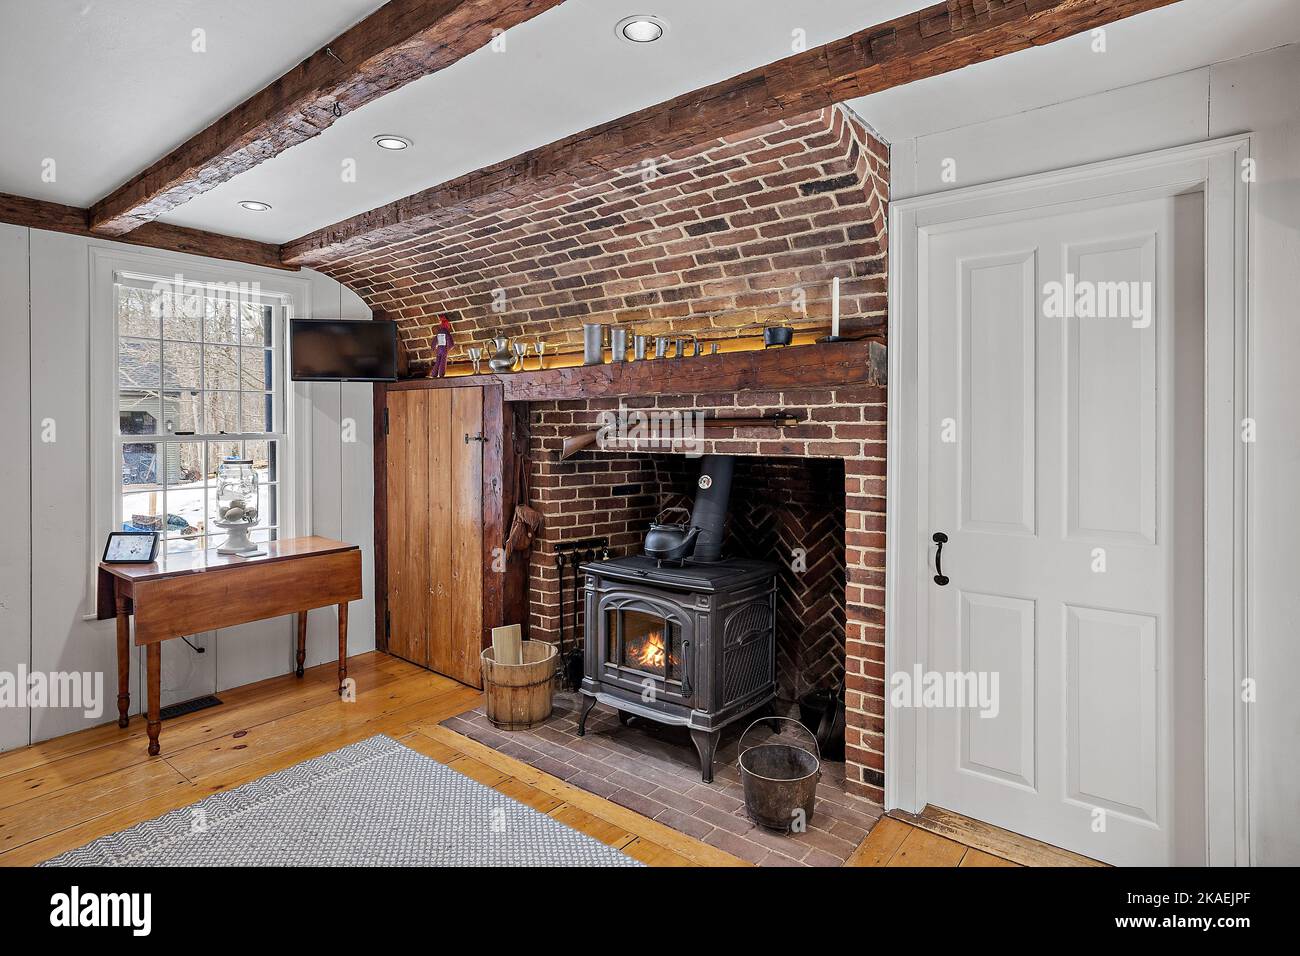 A wood stove in a brick fireplace in a cozy room decorated in vintage style with wooden furniture Stock Photo